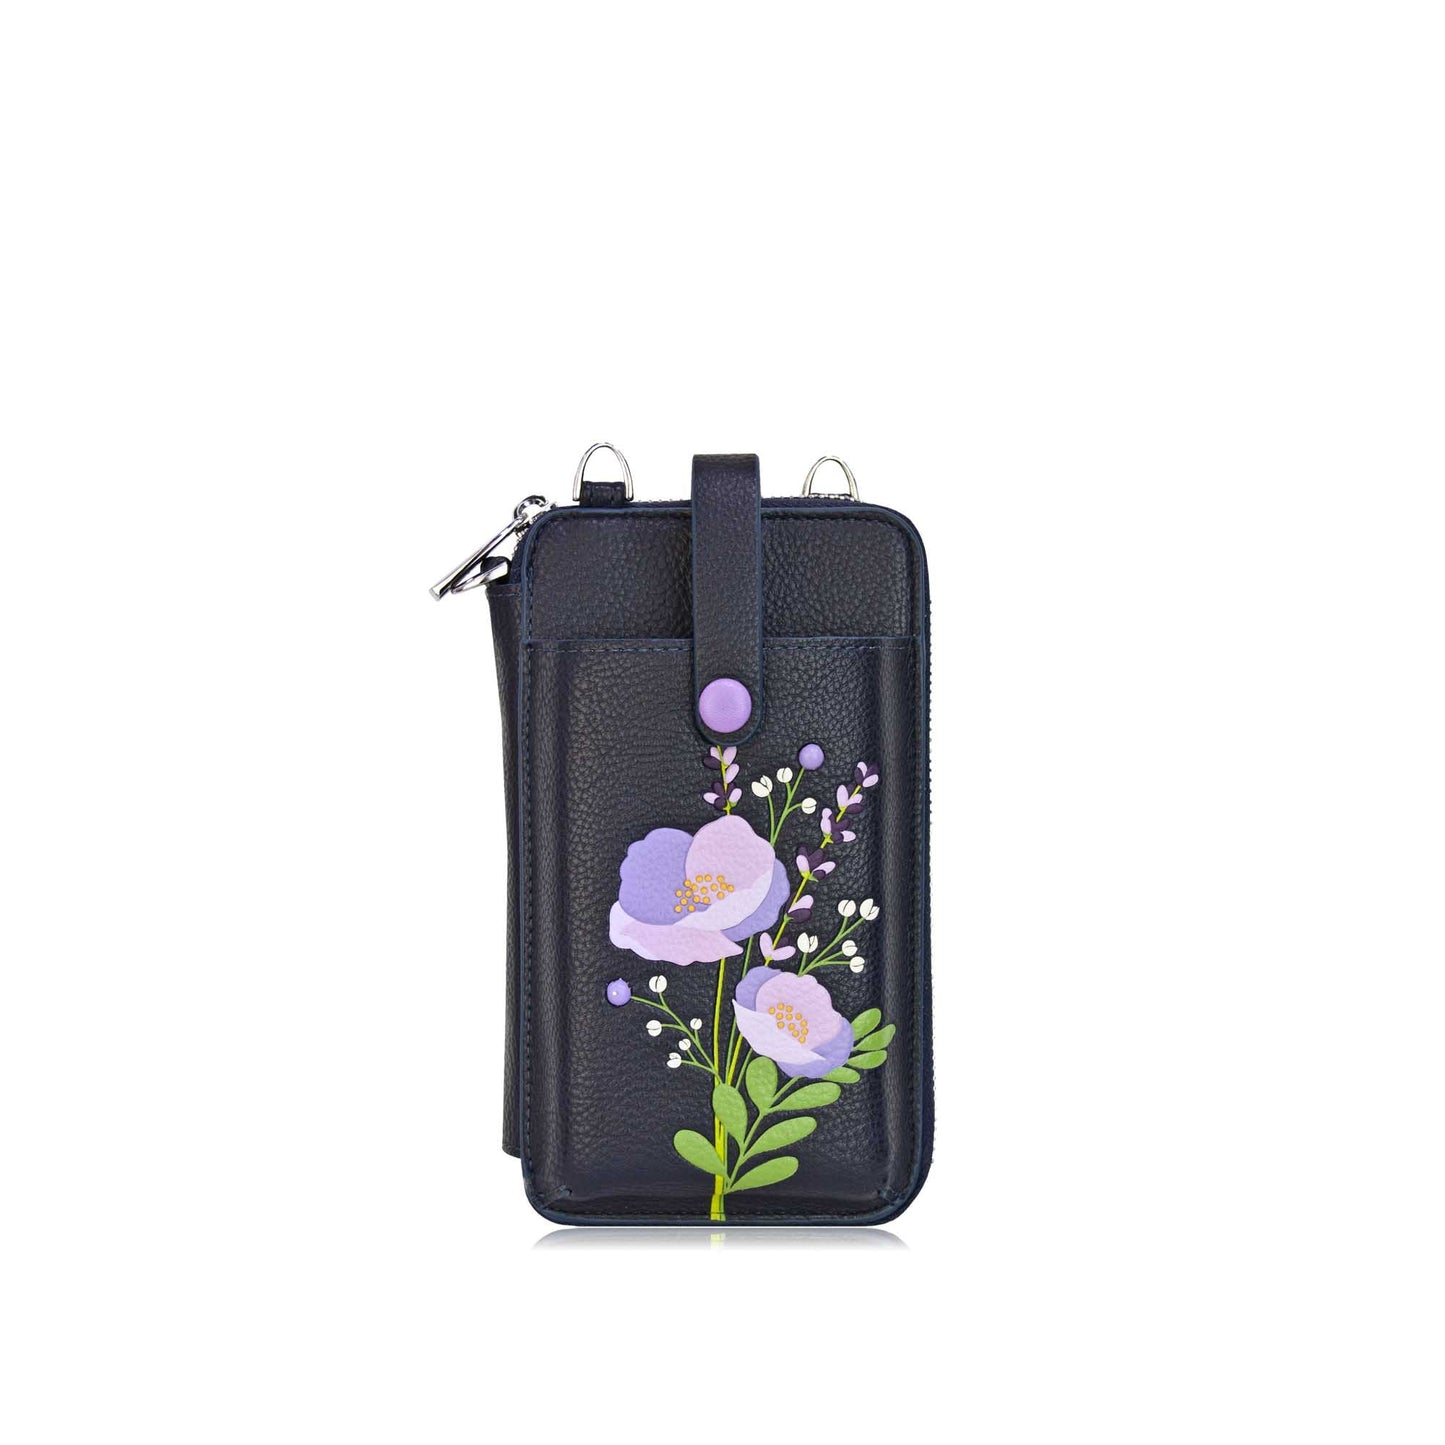 Meadow smartphone pouch